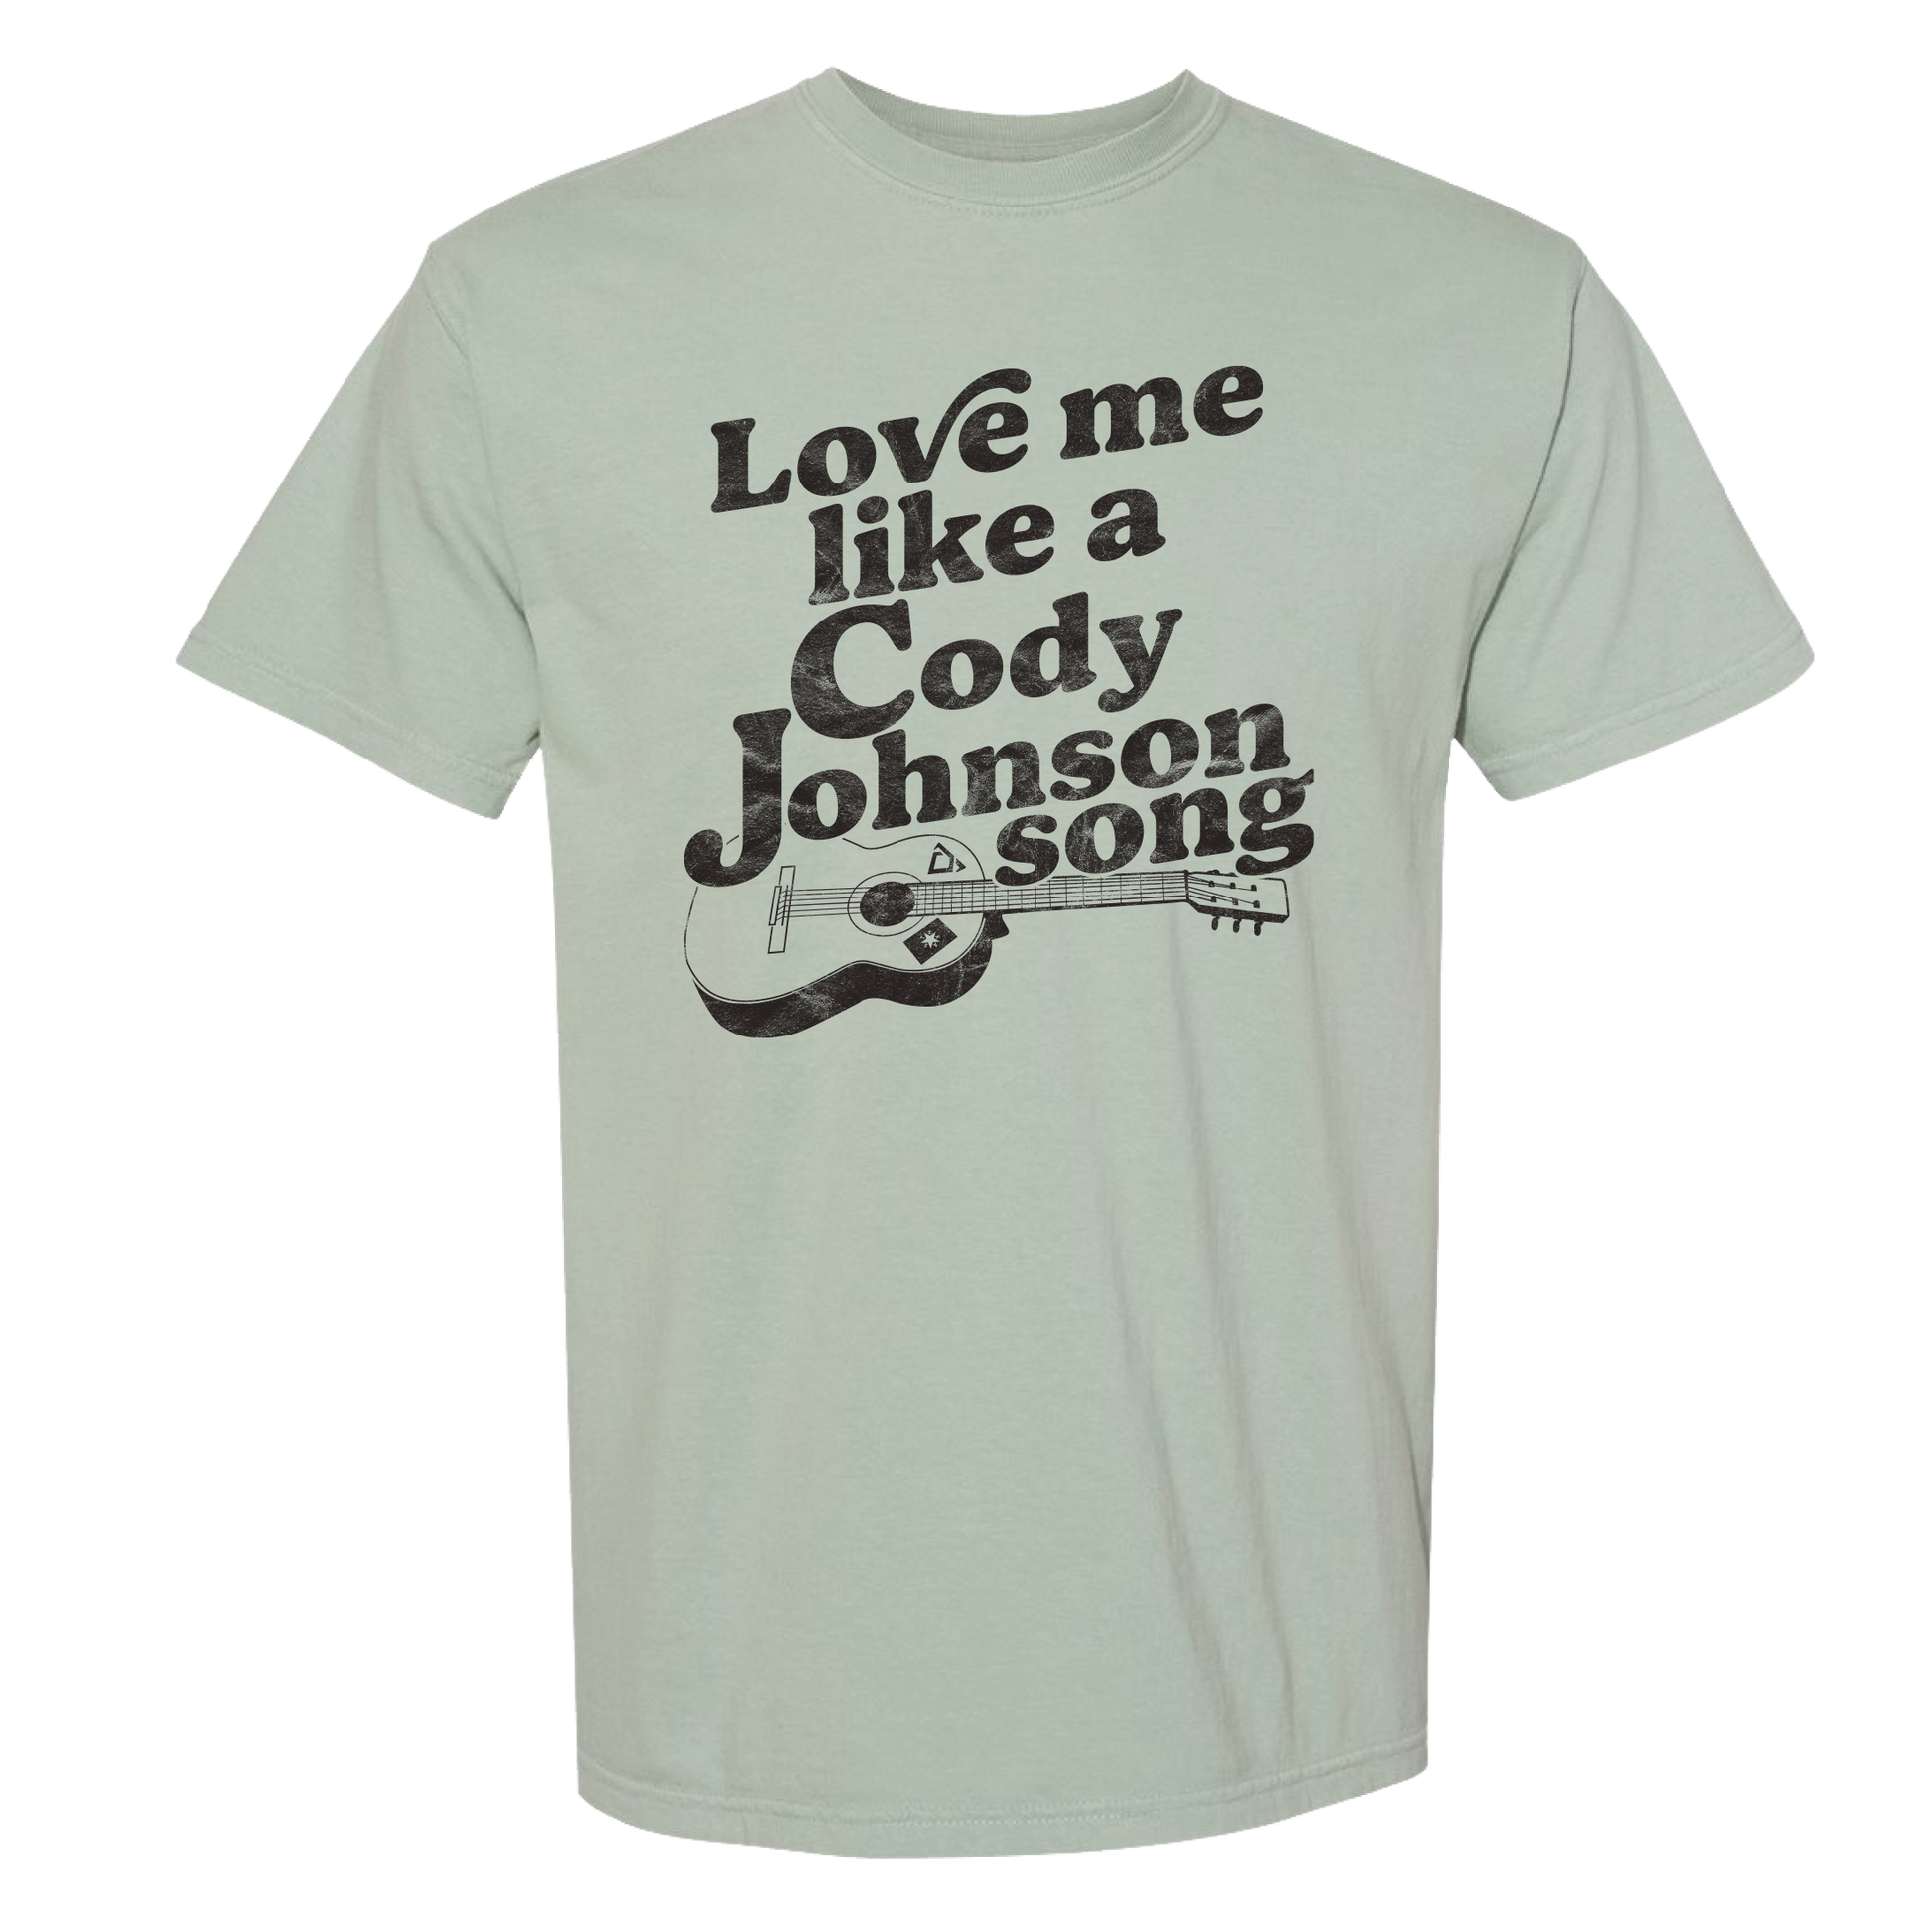 jade green with "Love me like a Cody Johnson Song" and a guitar depicted below the caption. 